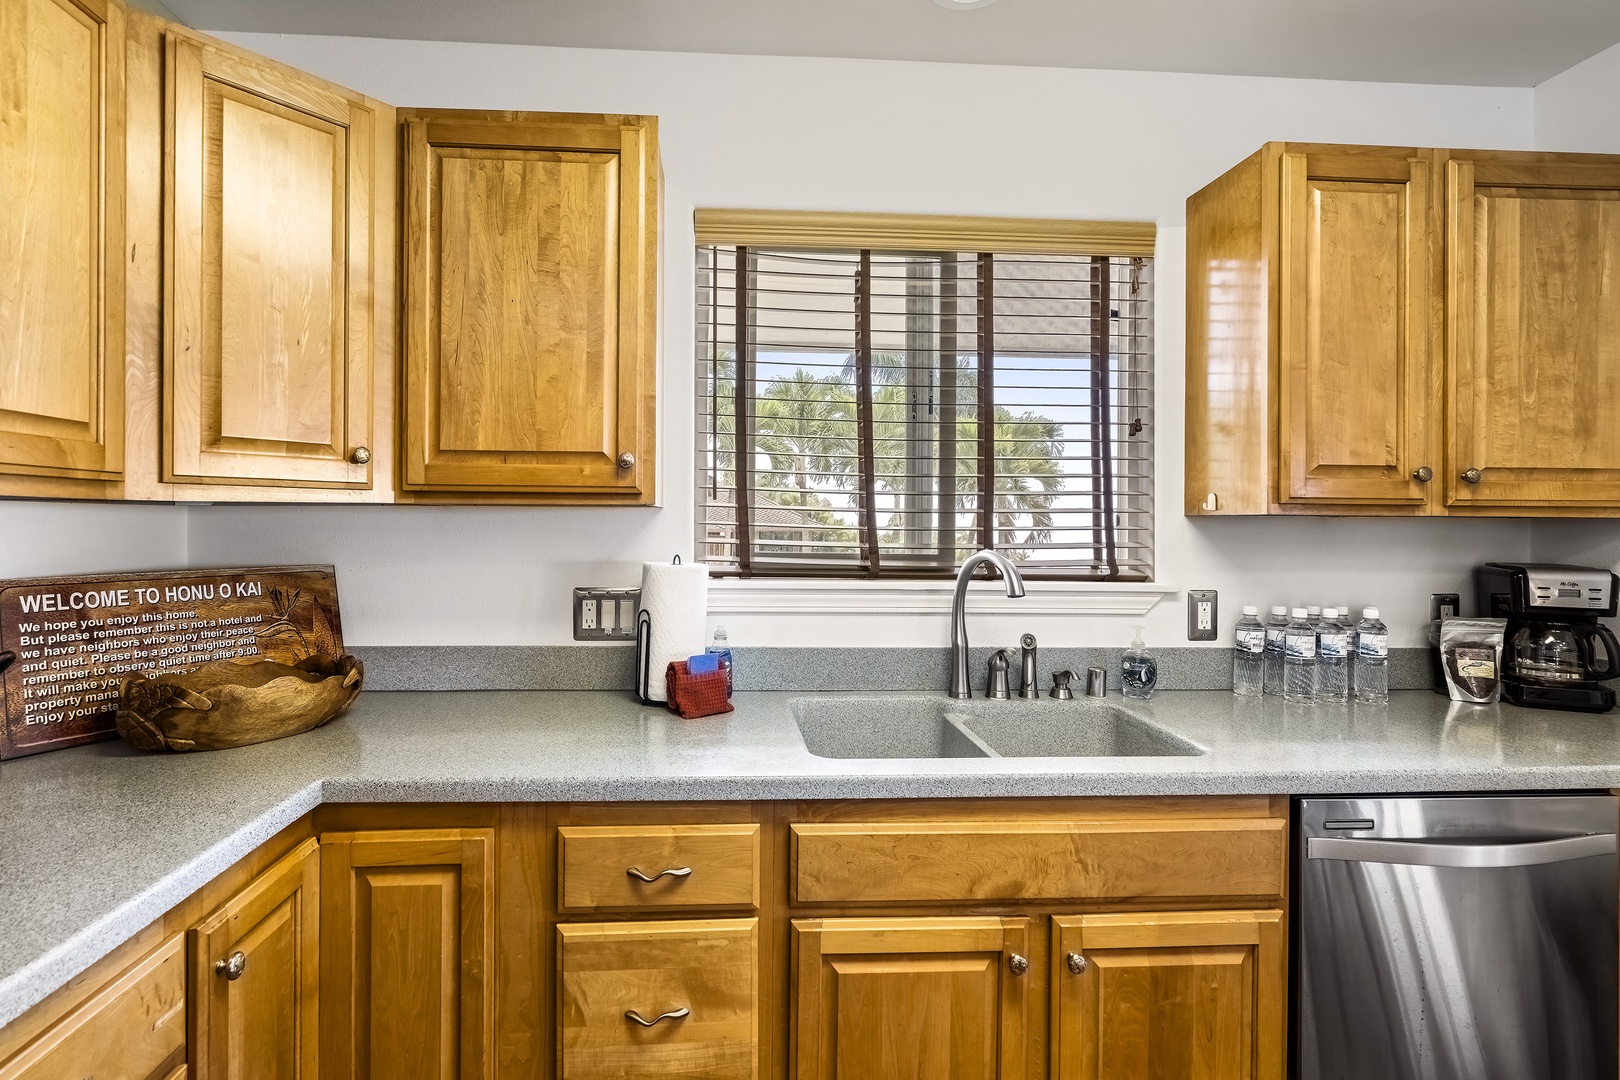 Kailua Kona Vacation Rentals, Honu O Kai (Turtle of the Sea) - You can even see the ocean while you wash dishes!